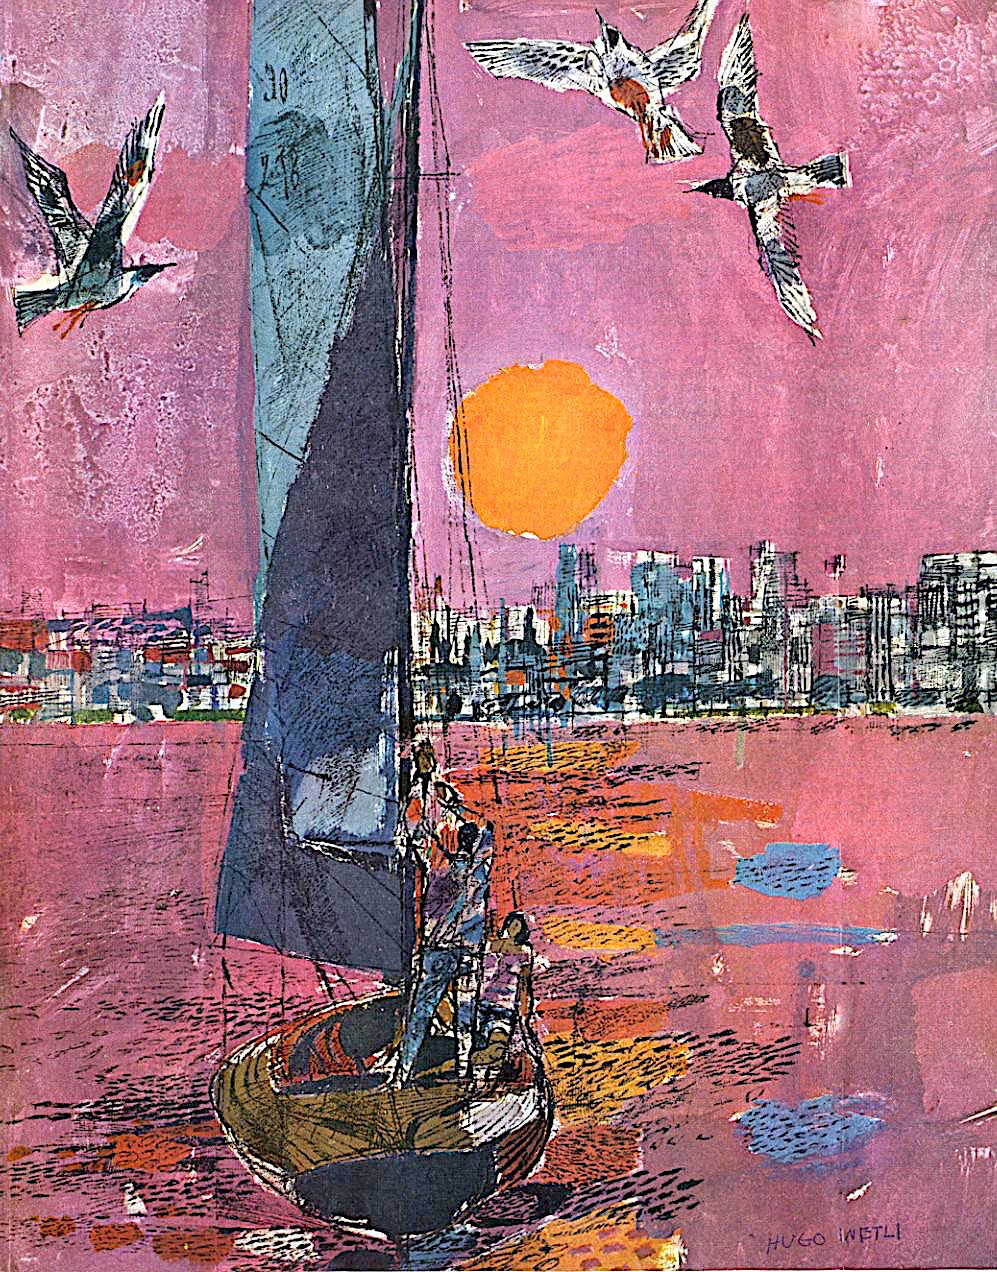 a Hugo Wetli travel poster illustration of a sailboat in an urban harbour